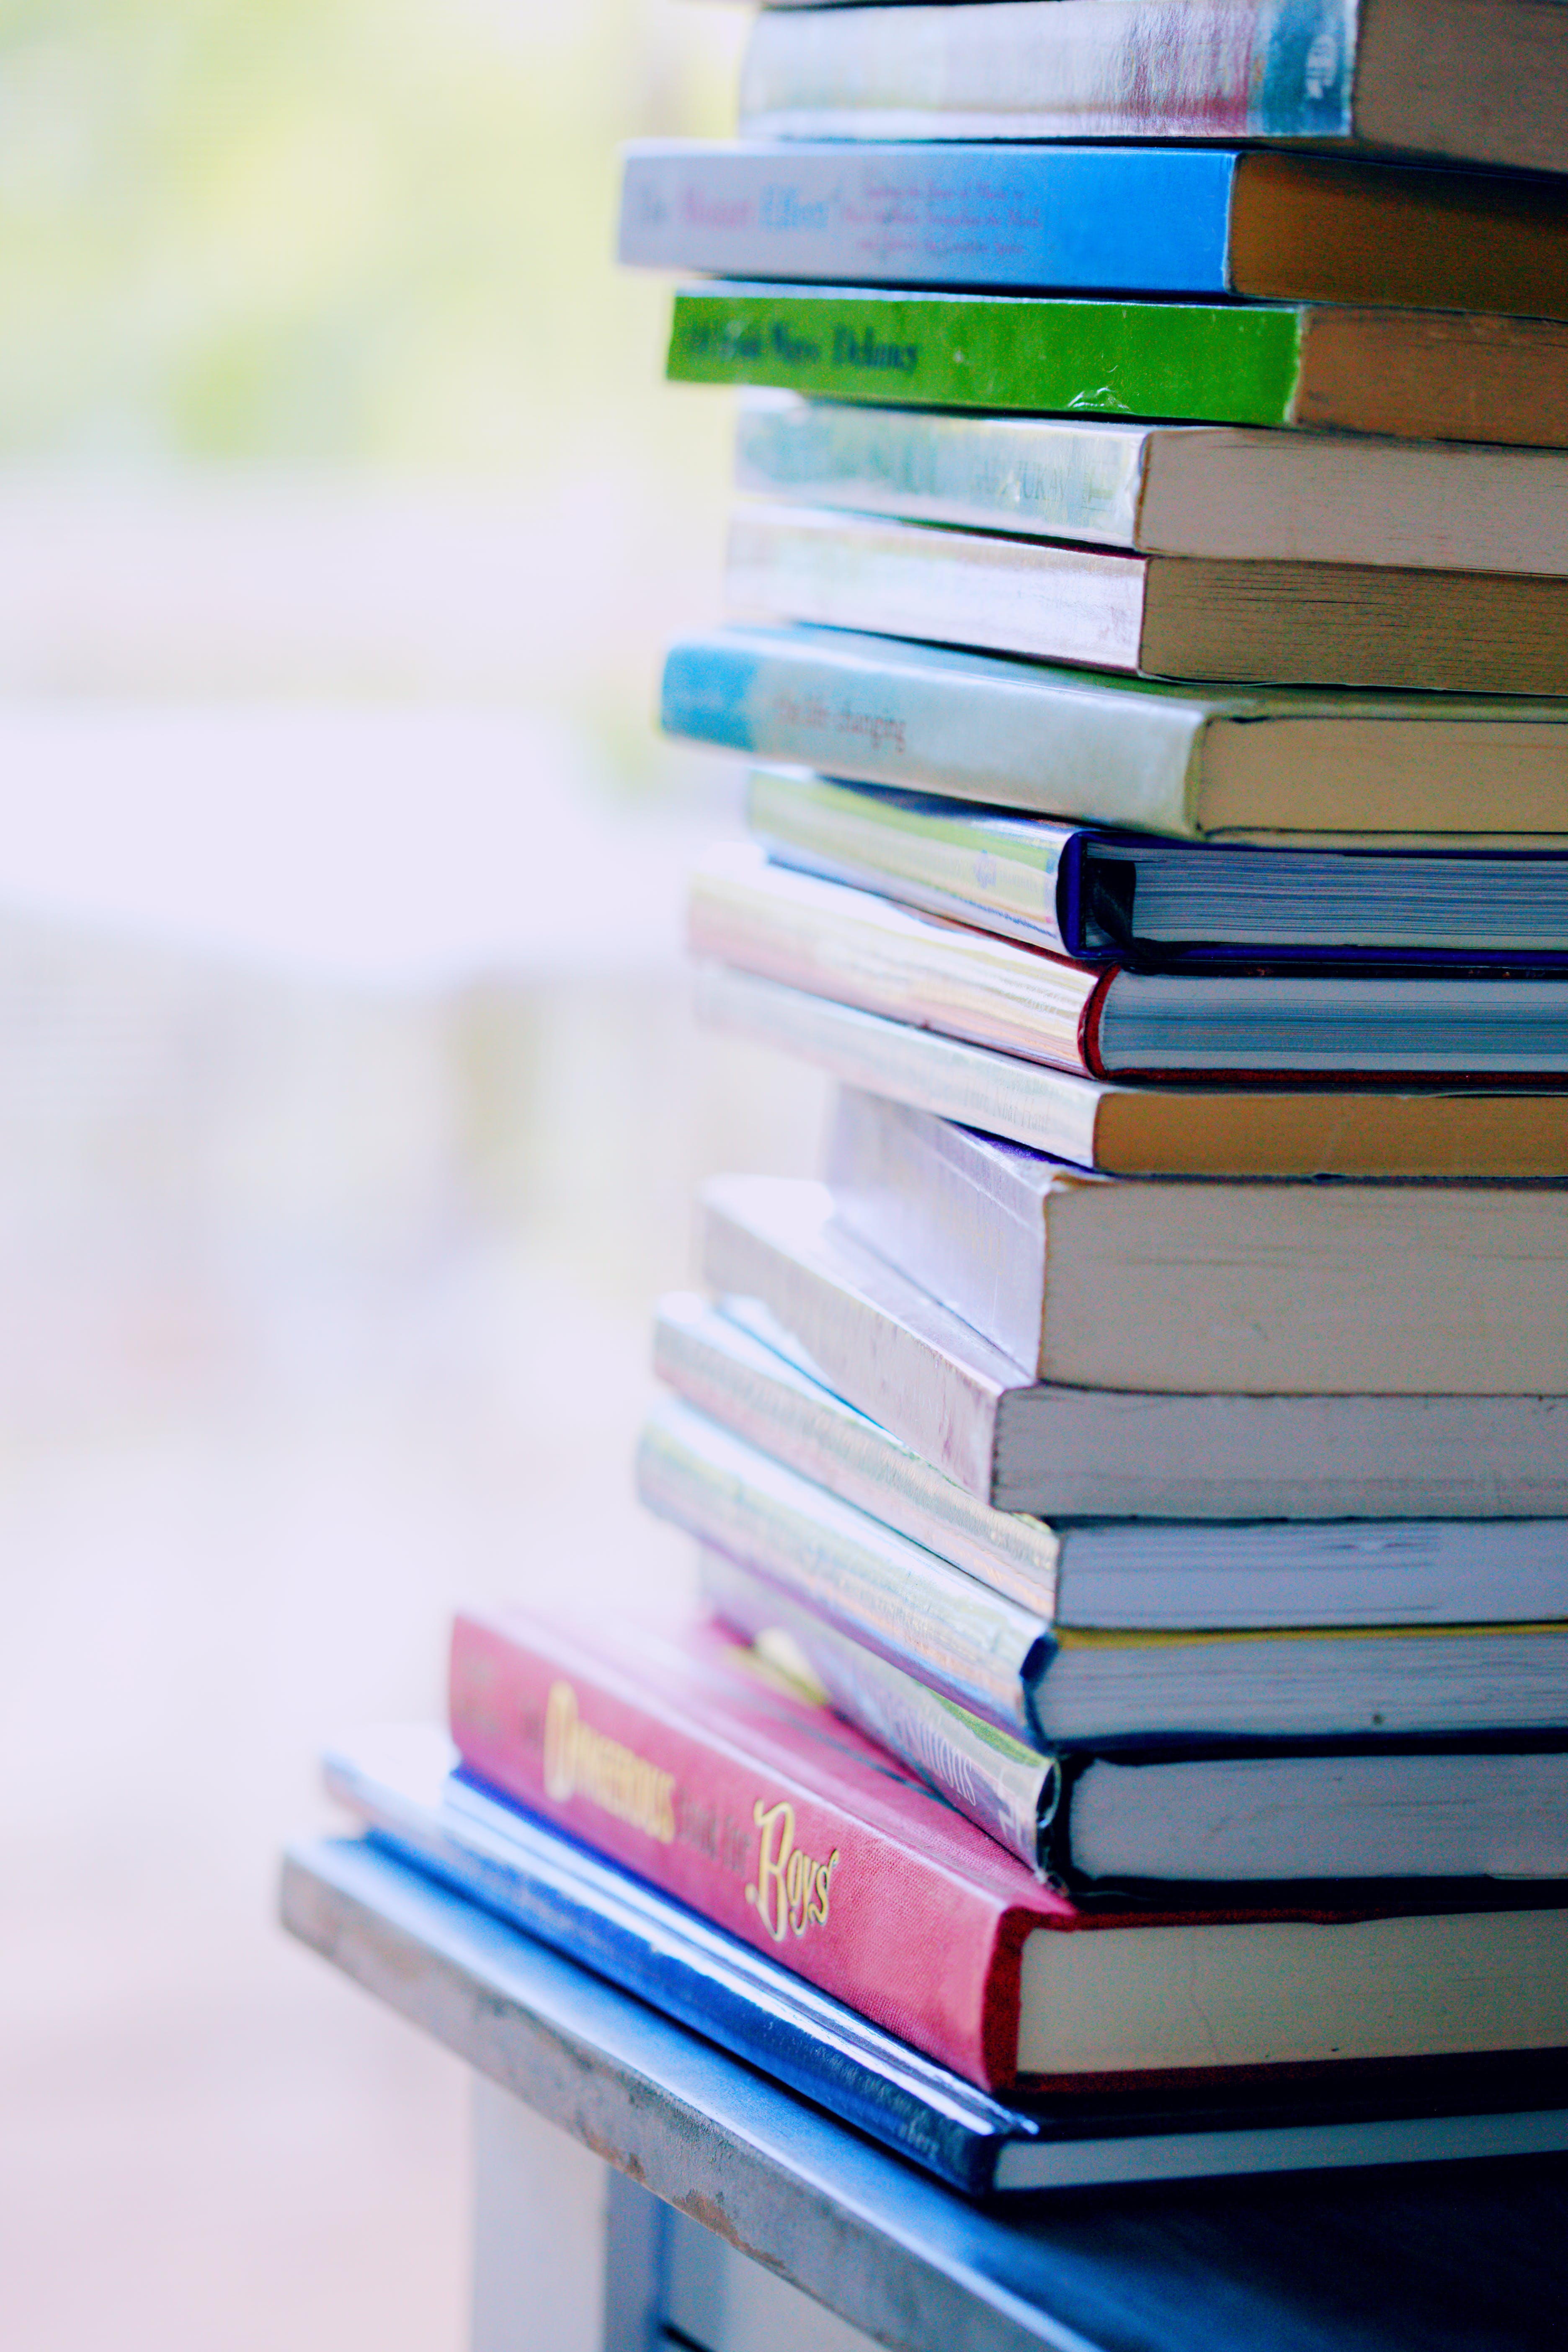 Image of the bindings of a tall stack of books on the corner of a table.